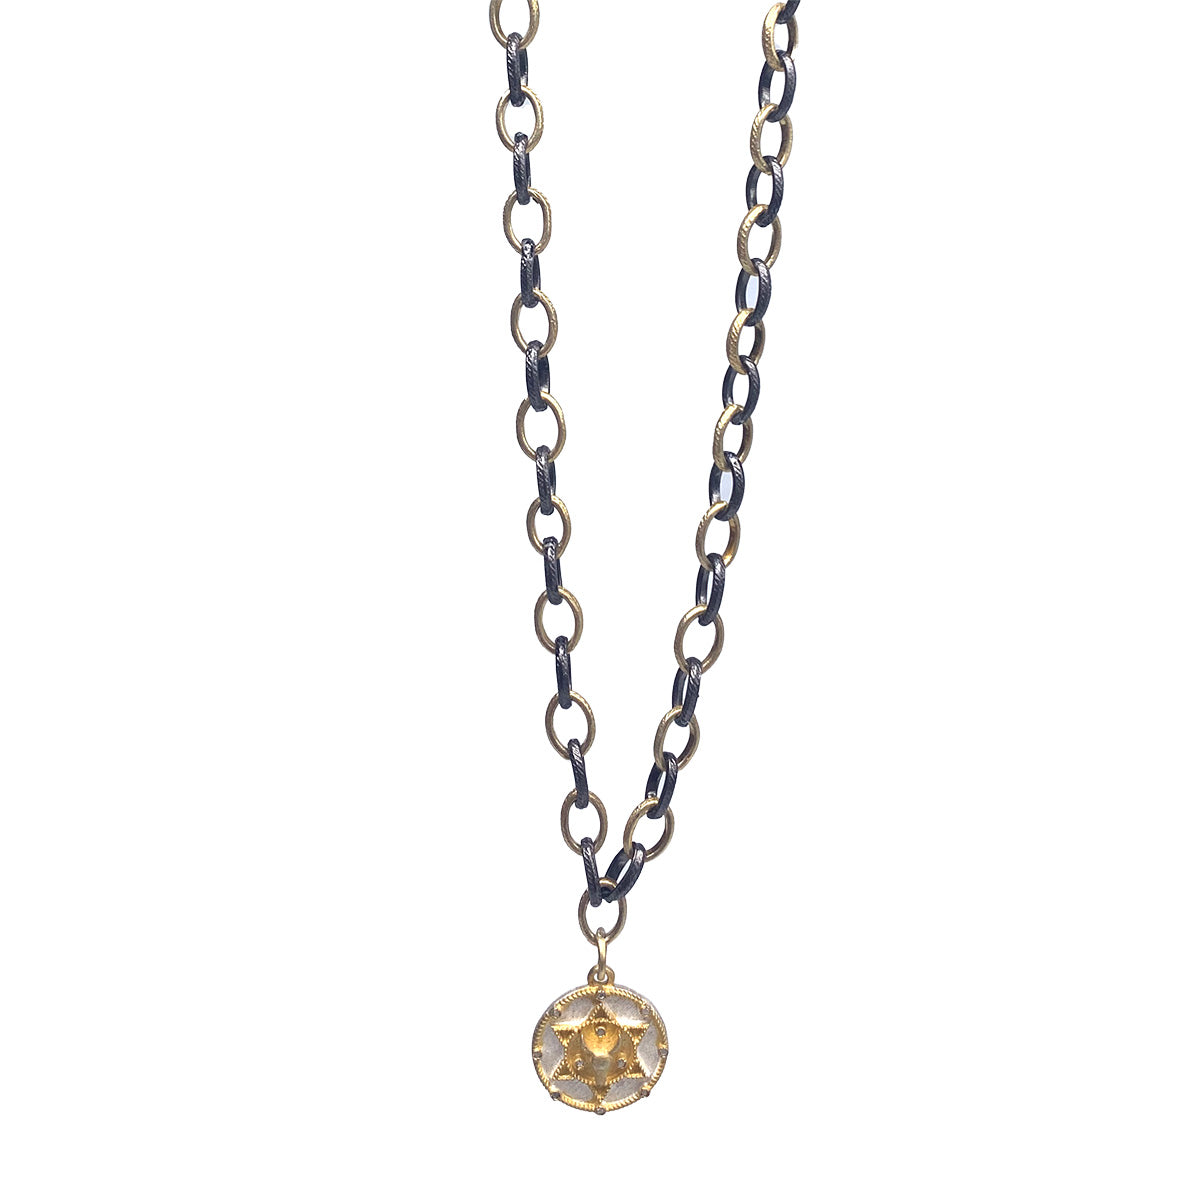 Bullish Silver and Gold Charm Necklace